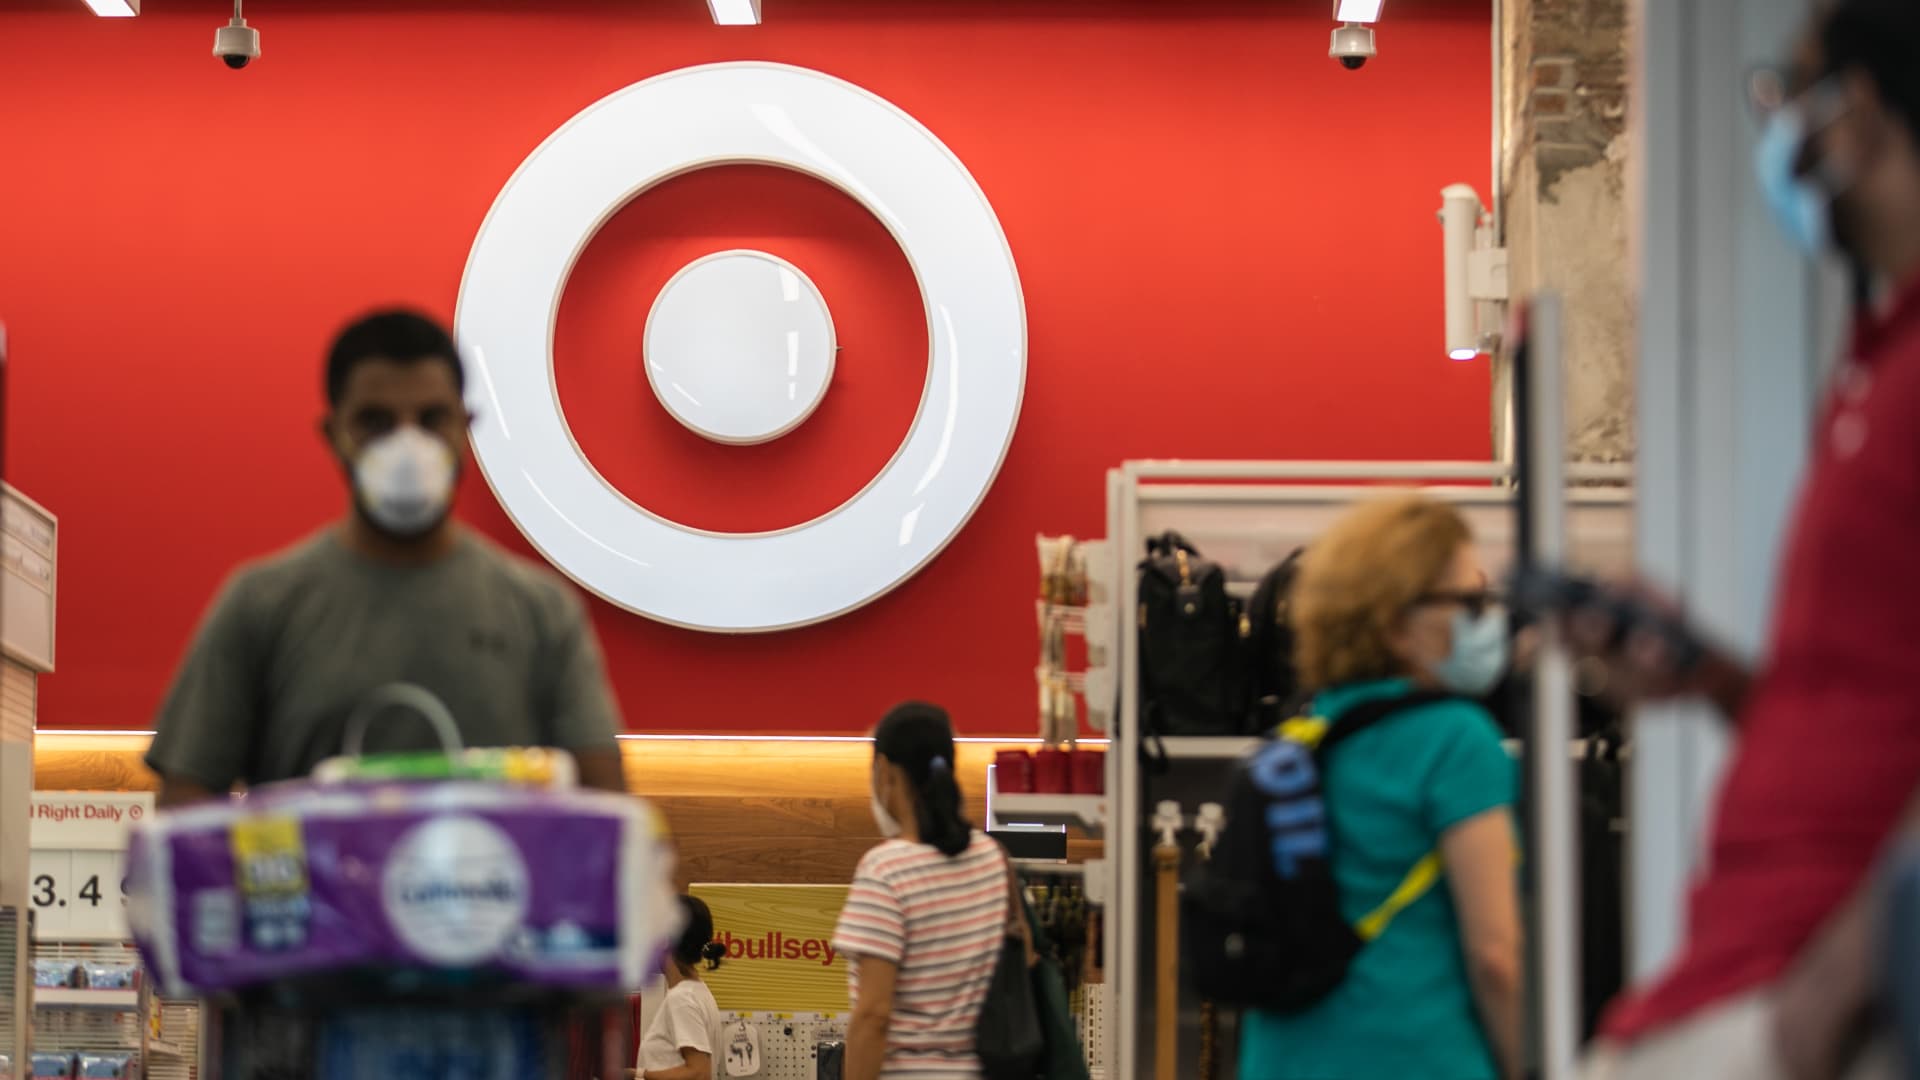 Shoppers wear protective masks inside a Target Corp. store in New York, U.S., on Saturday, Aug. 15, 2020. Target is scheduled to release earnings figures on August 19.